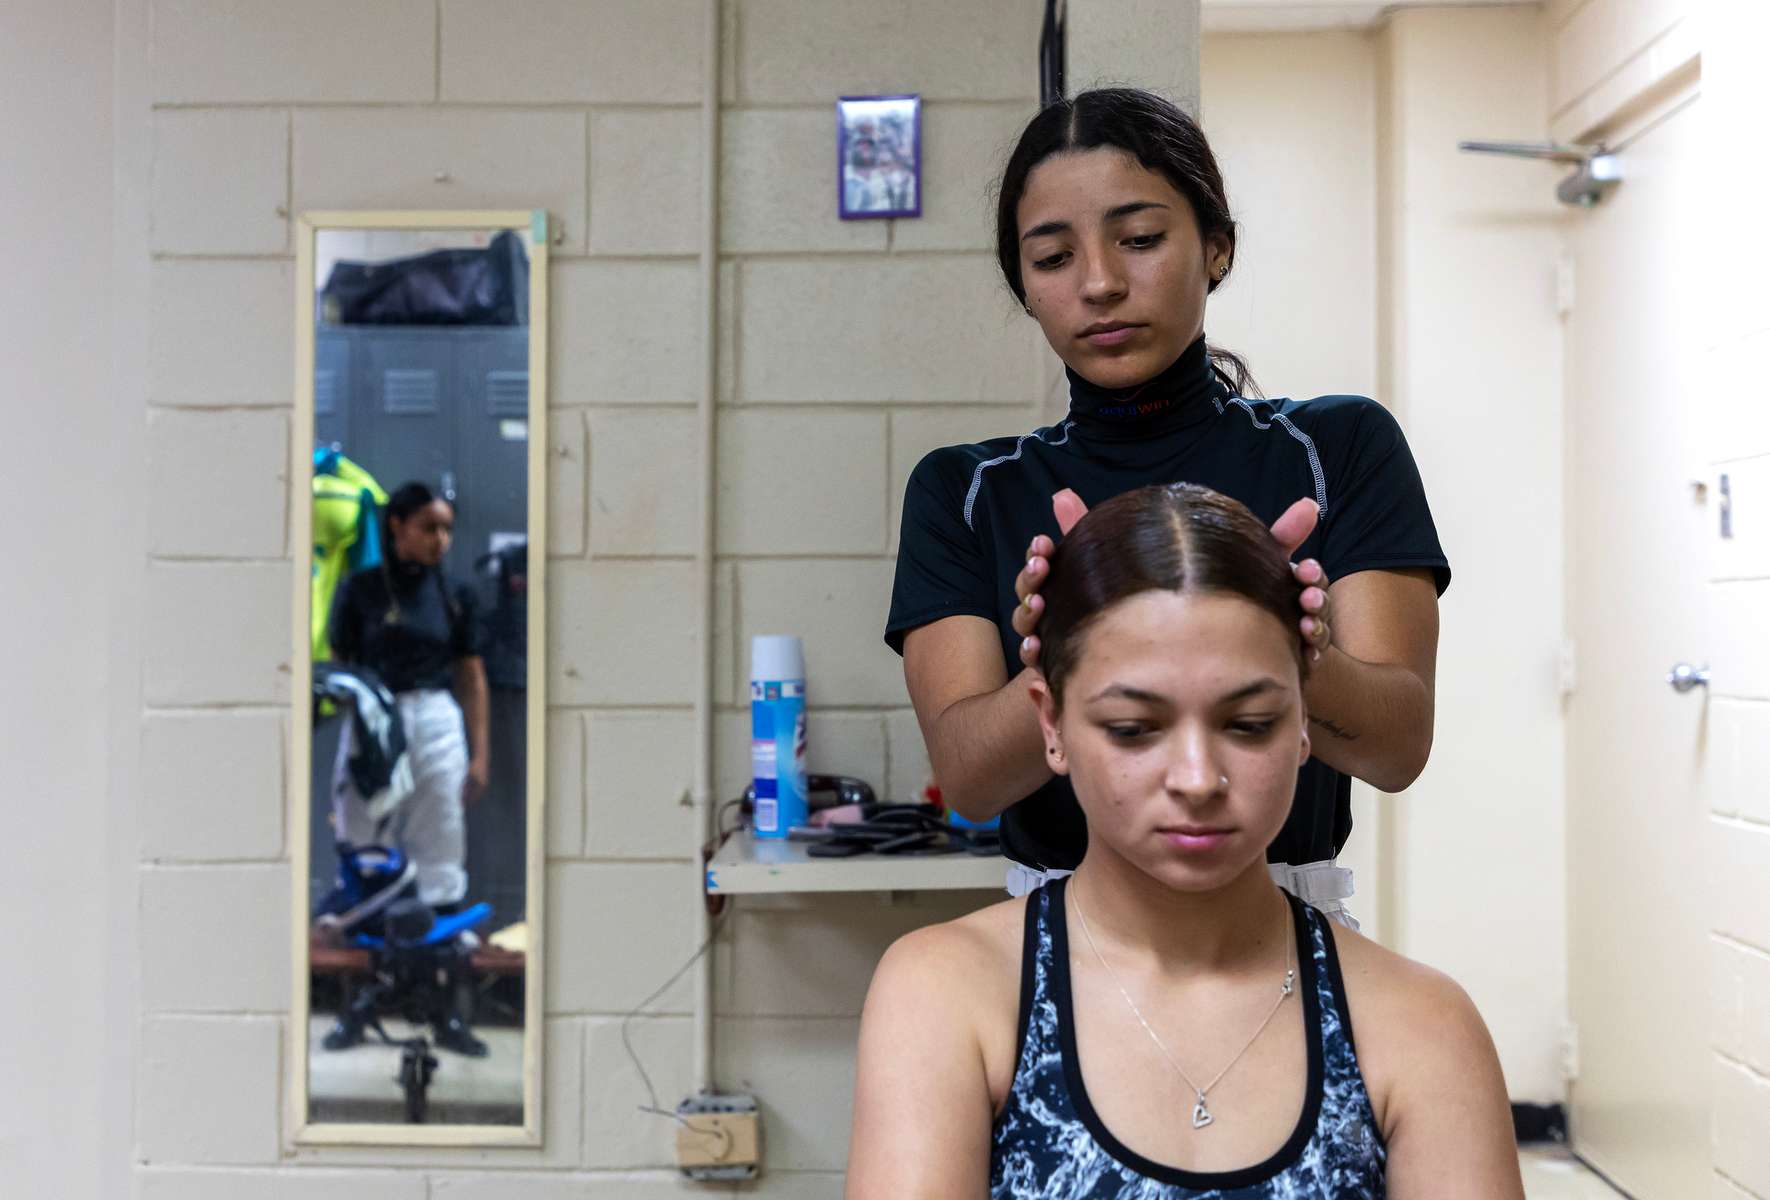 Student Jockey Valeria Melendez  braids the hair of fellow student jockey Elbaliz Rodriguez at the Vocational Equestrian Agustín Mercado Reverón School located in the Hipódromo Camarero on November 18, 2022 in Canovanas, Puerto Rico. The Vocational Equestrian Agustín Mercado Reverón School has produced some of the best jockeys in the world but also prepares students for a wide range of equestrian jobs on a tuition-free basis.  